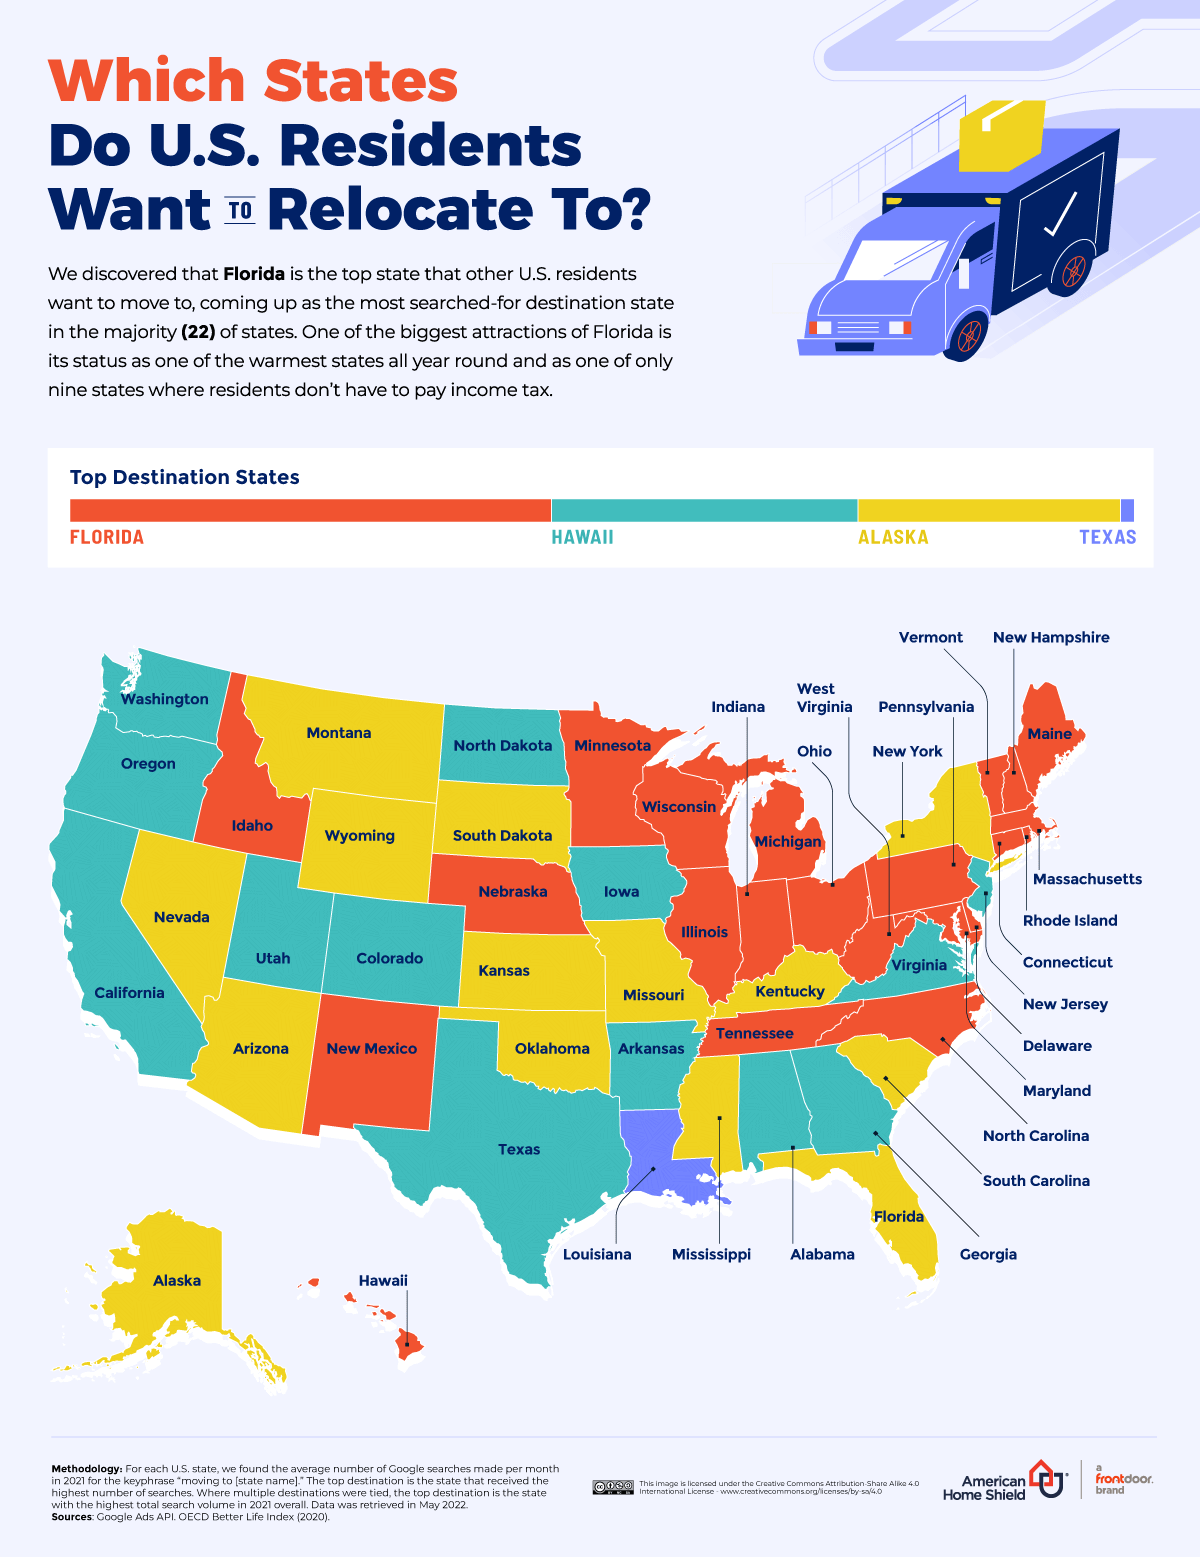 01_Where-Do-US-Residents-Want-to-Relocate-To_Domestically_US-Map.png